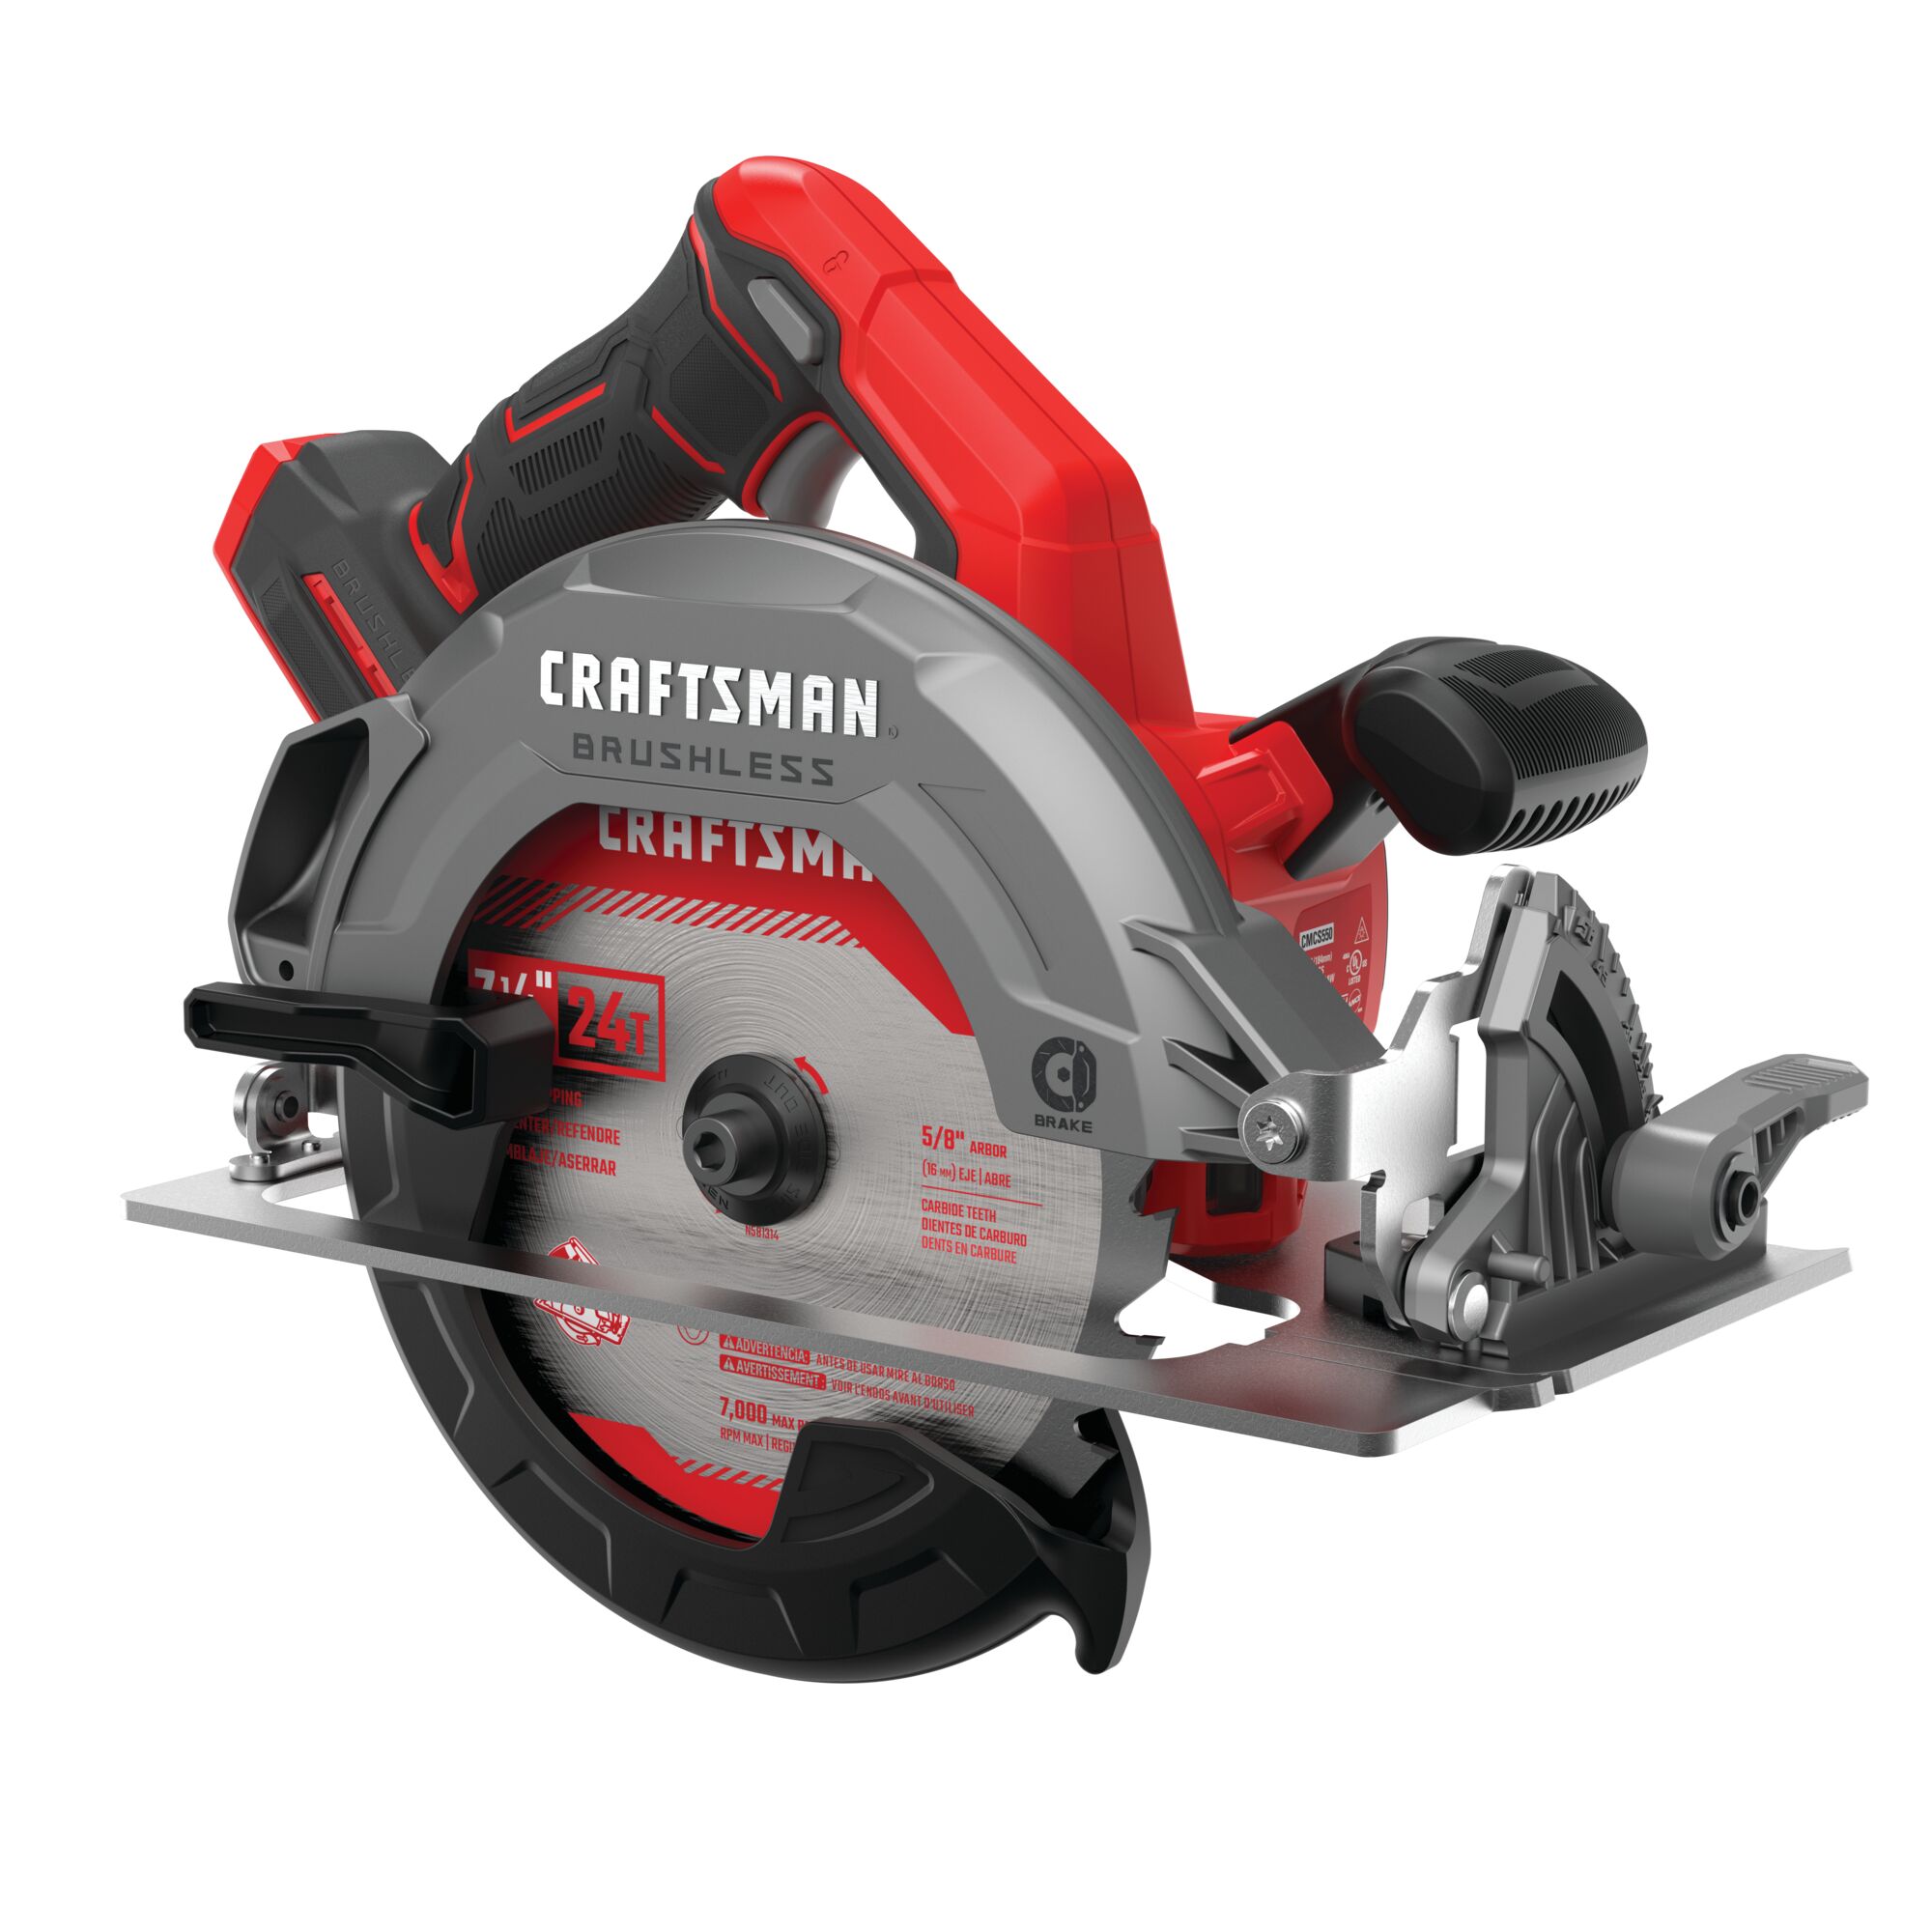 Right profile of 20 volt 7 1 quarter inch brushless cordless circular saw.